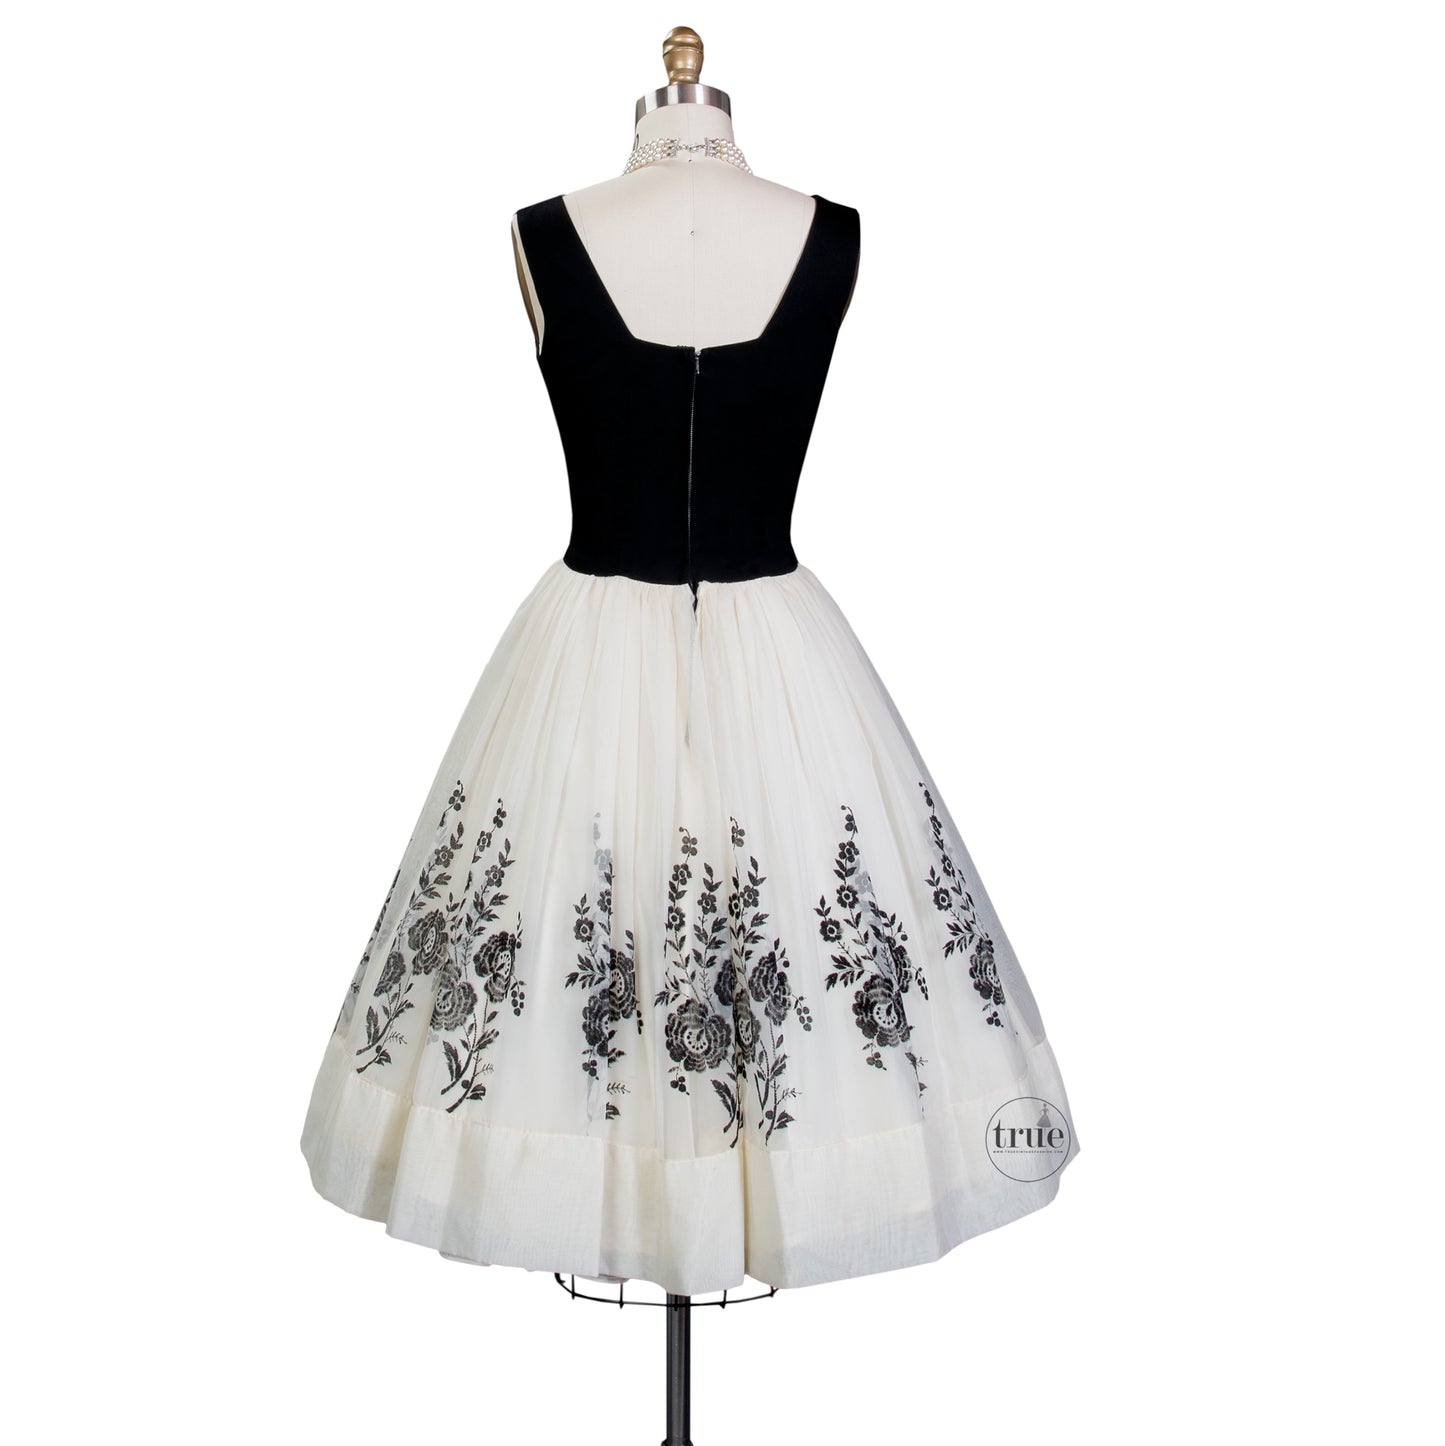 vintage 1950's dress ...fluffy embroidered cream chiffon 3 layer skirt and crepe bodice